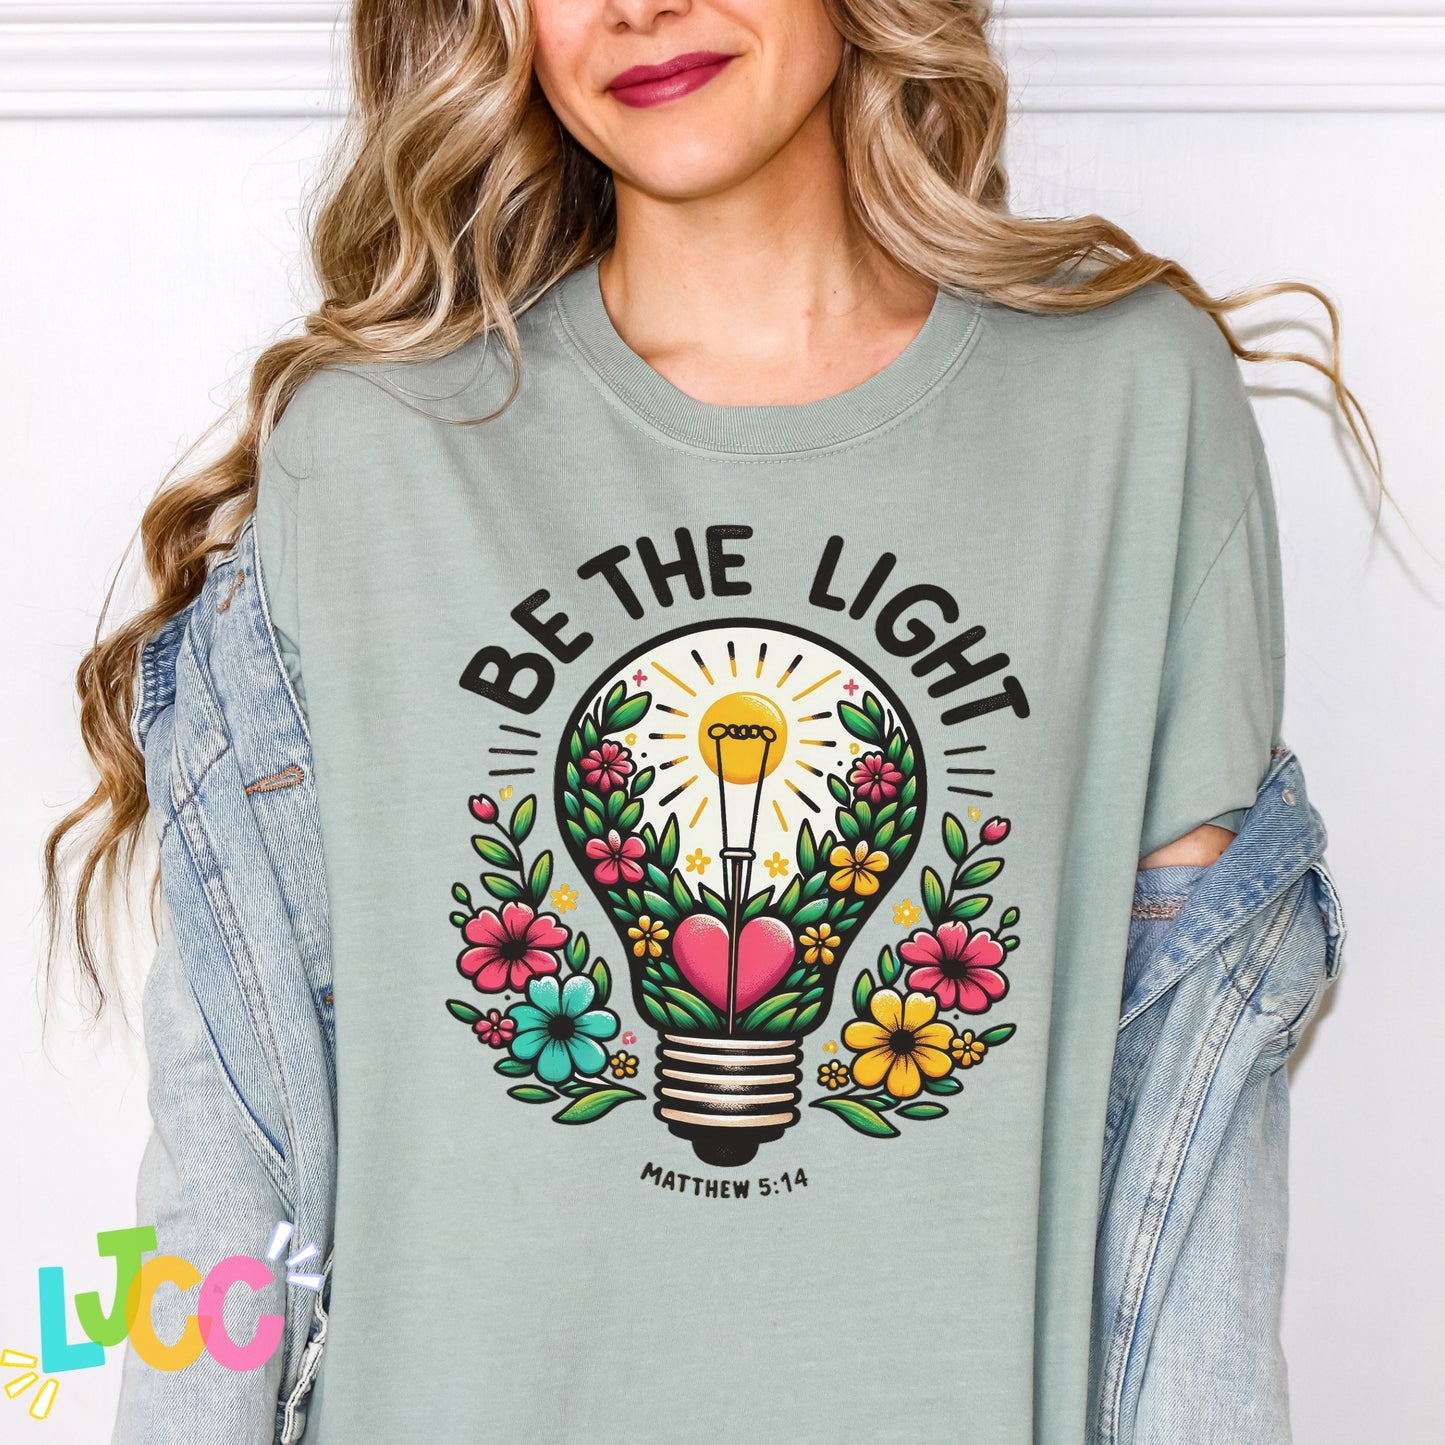 Be the Light